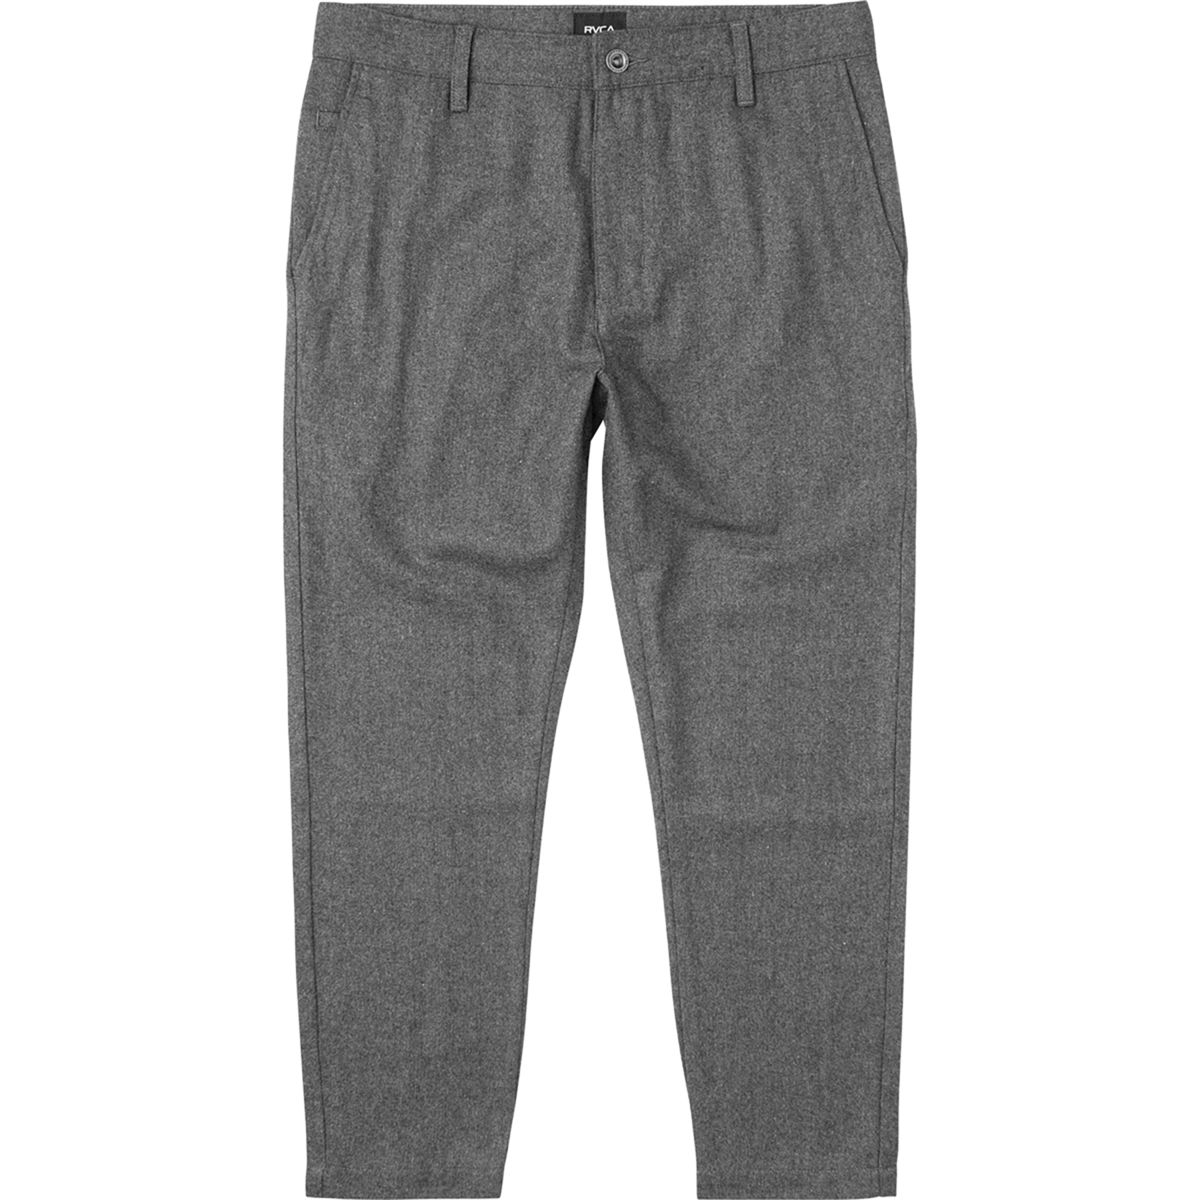 RVCA Hitcher Suiting Pant - Men's - Clothing